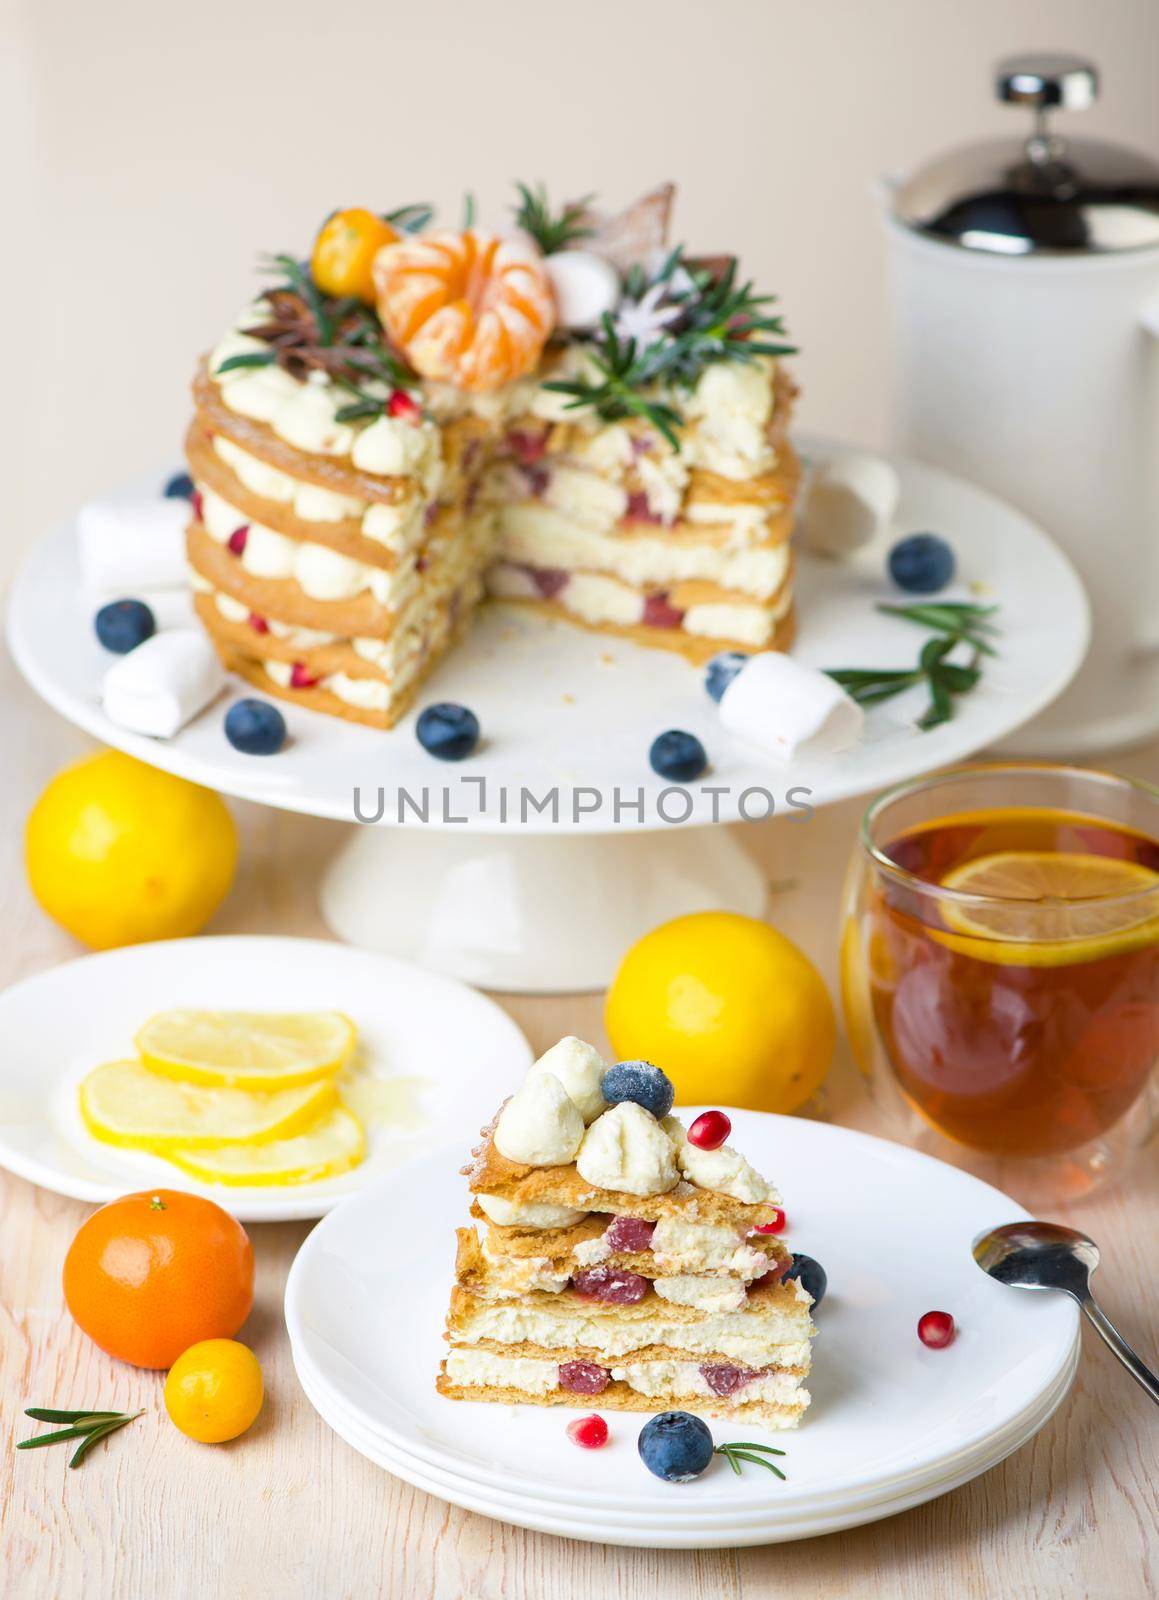 Honey cake pieces on a plate with lemon tea for dessert by aprilphoto